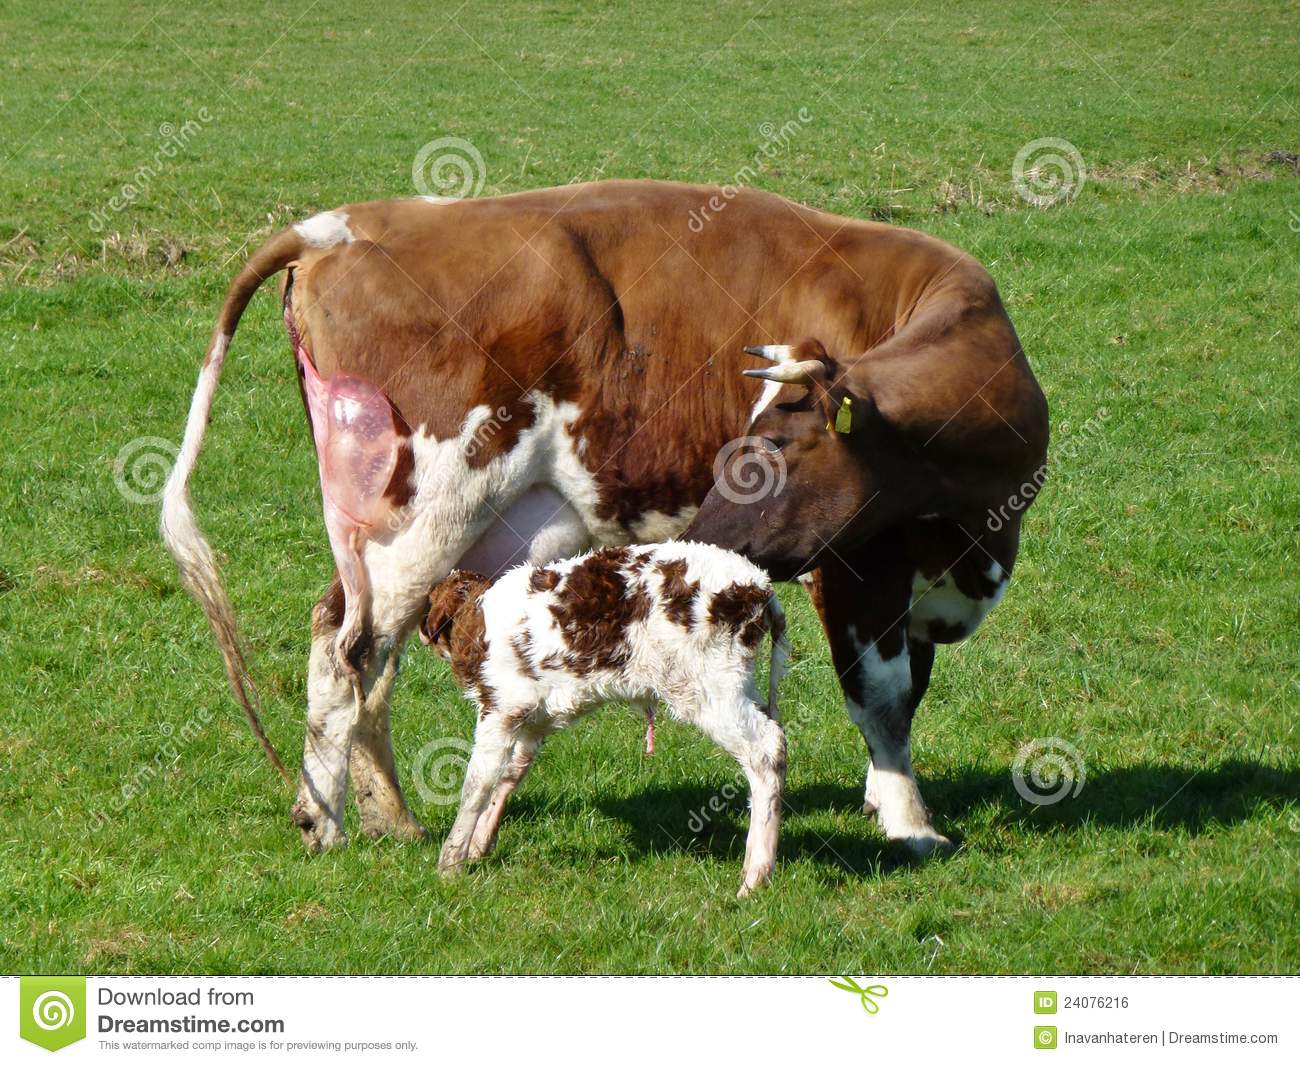 Take Care Of Her Baby Calf Royalty Free Stock Image   Image  24076216